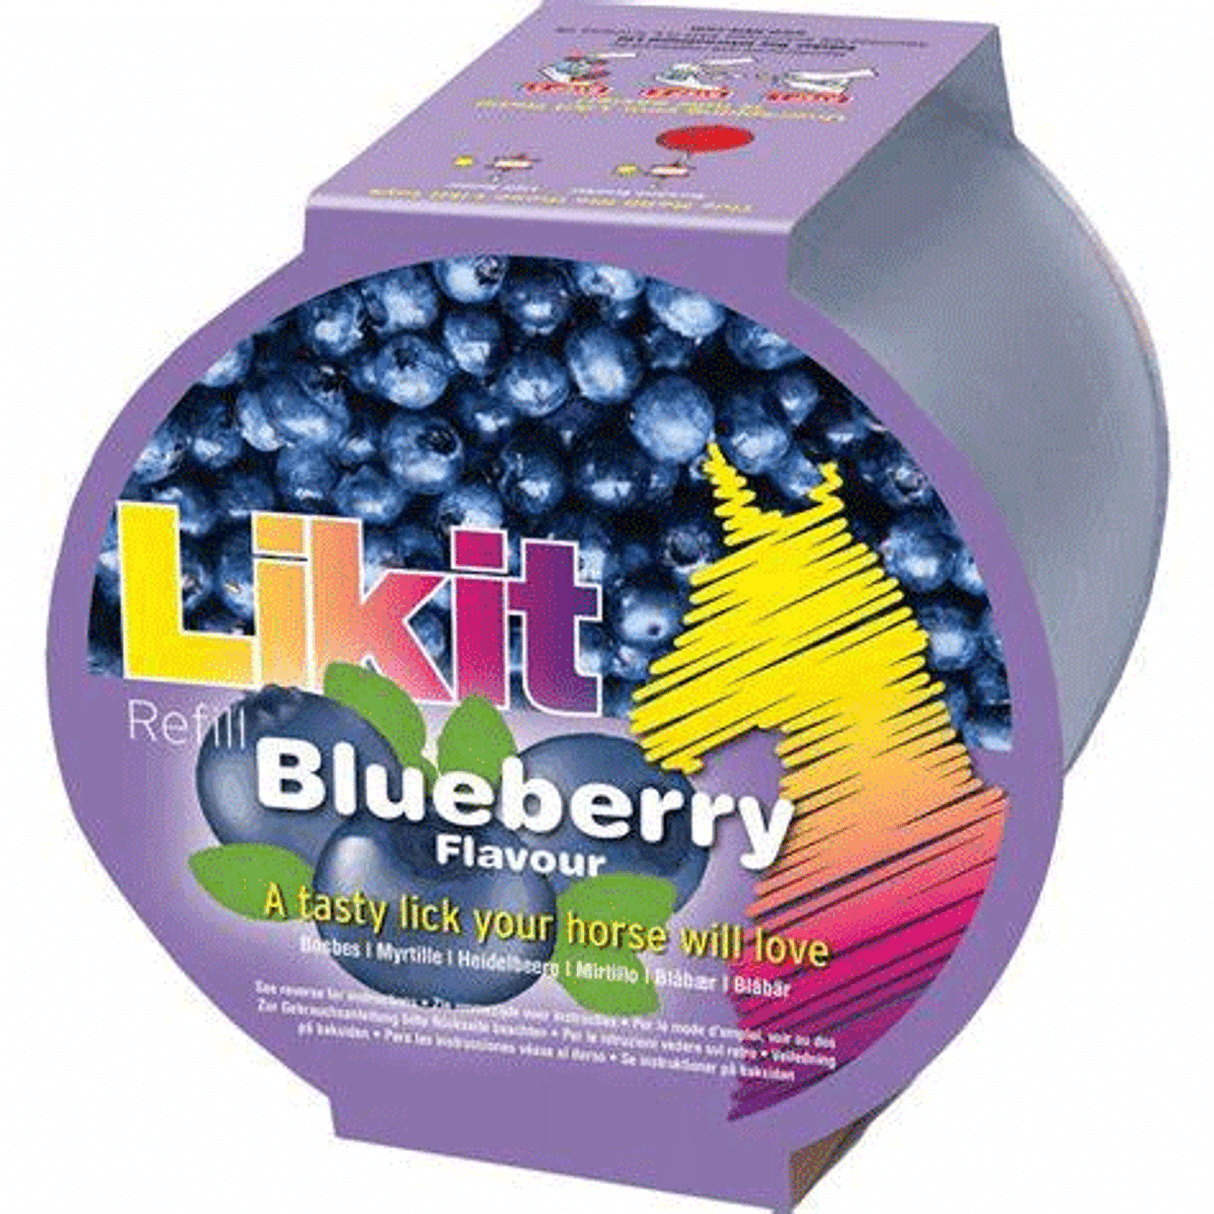 Likit Refill Single #flavour_blueberry